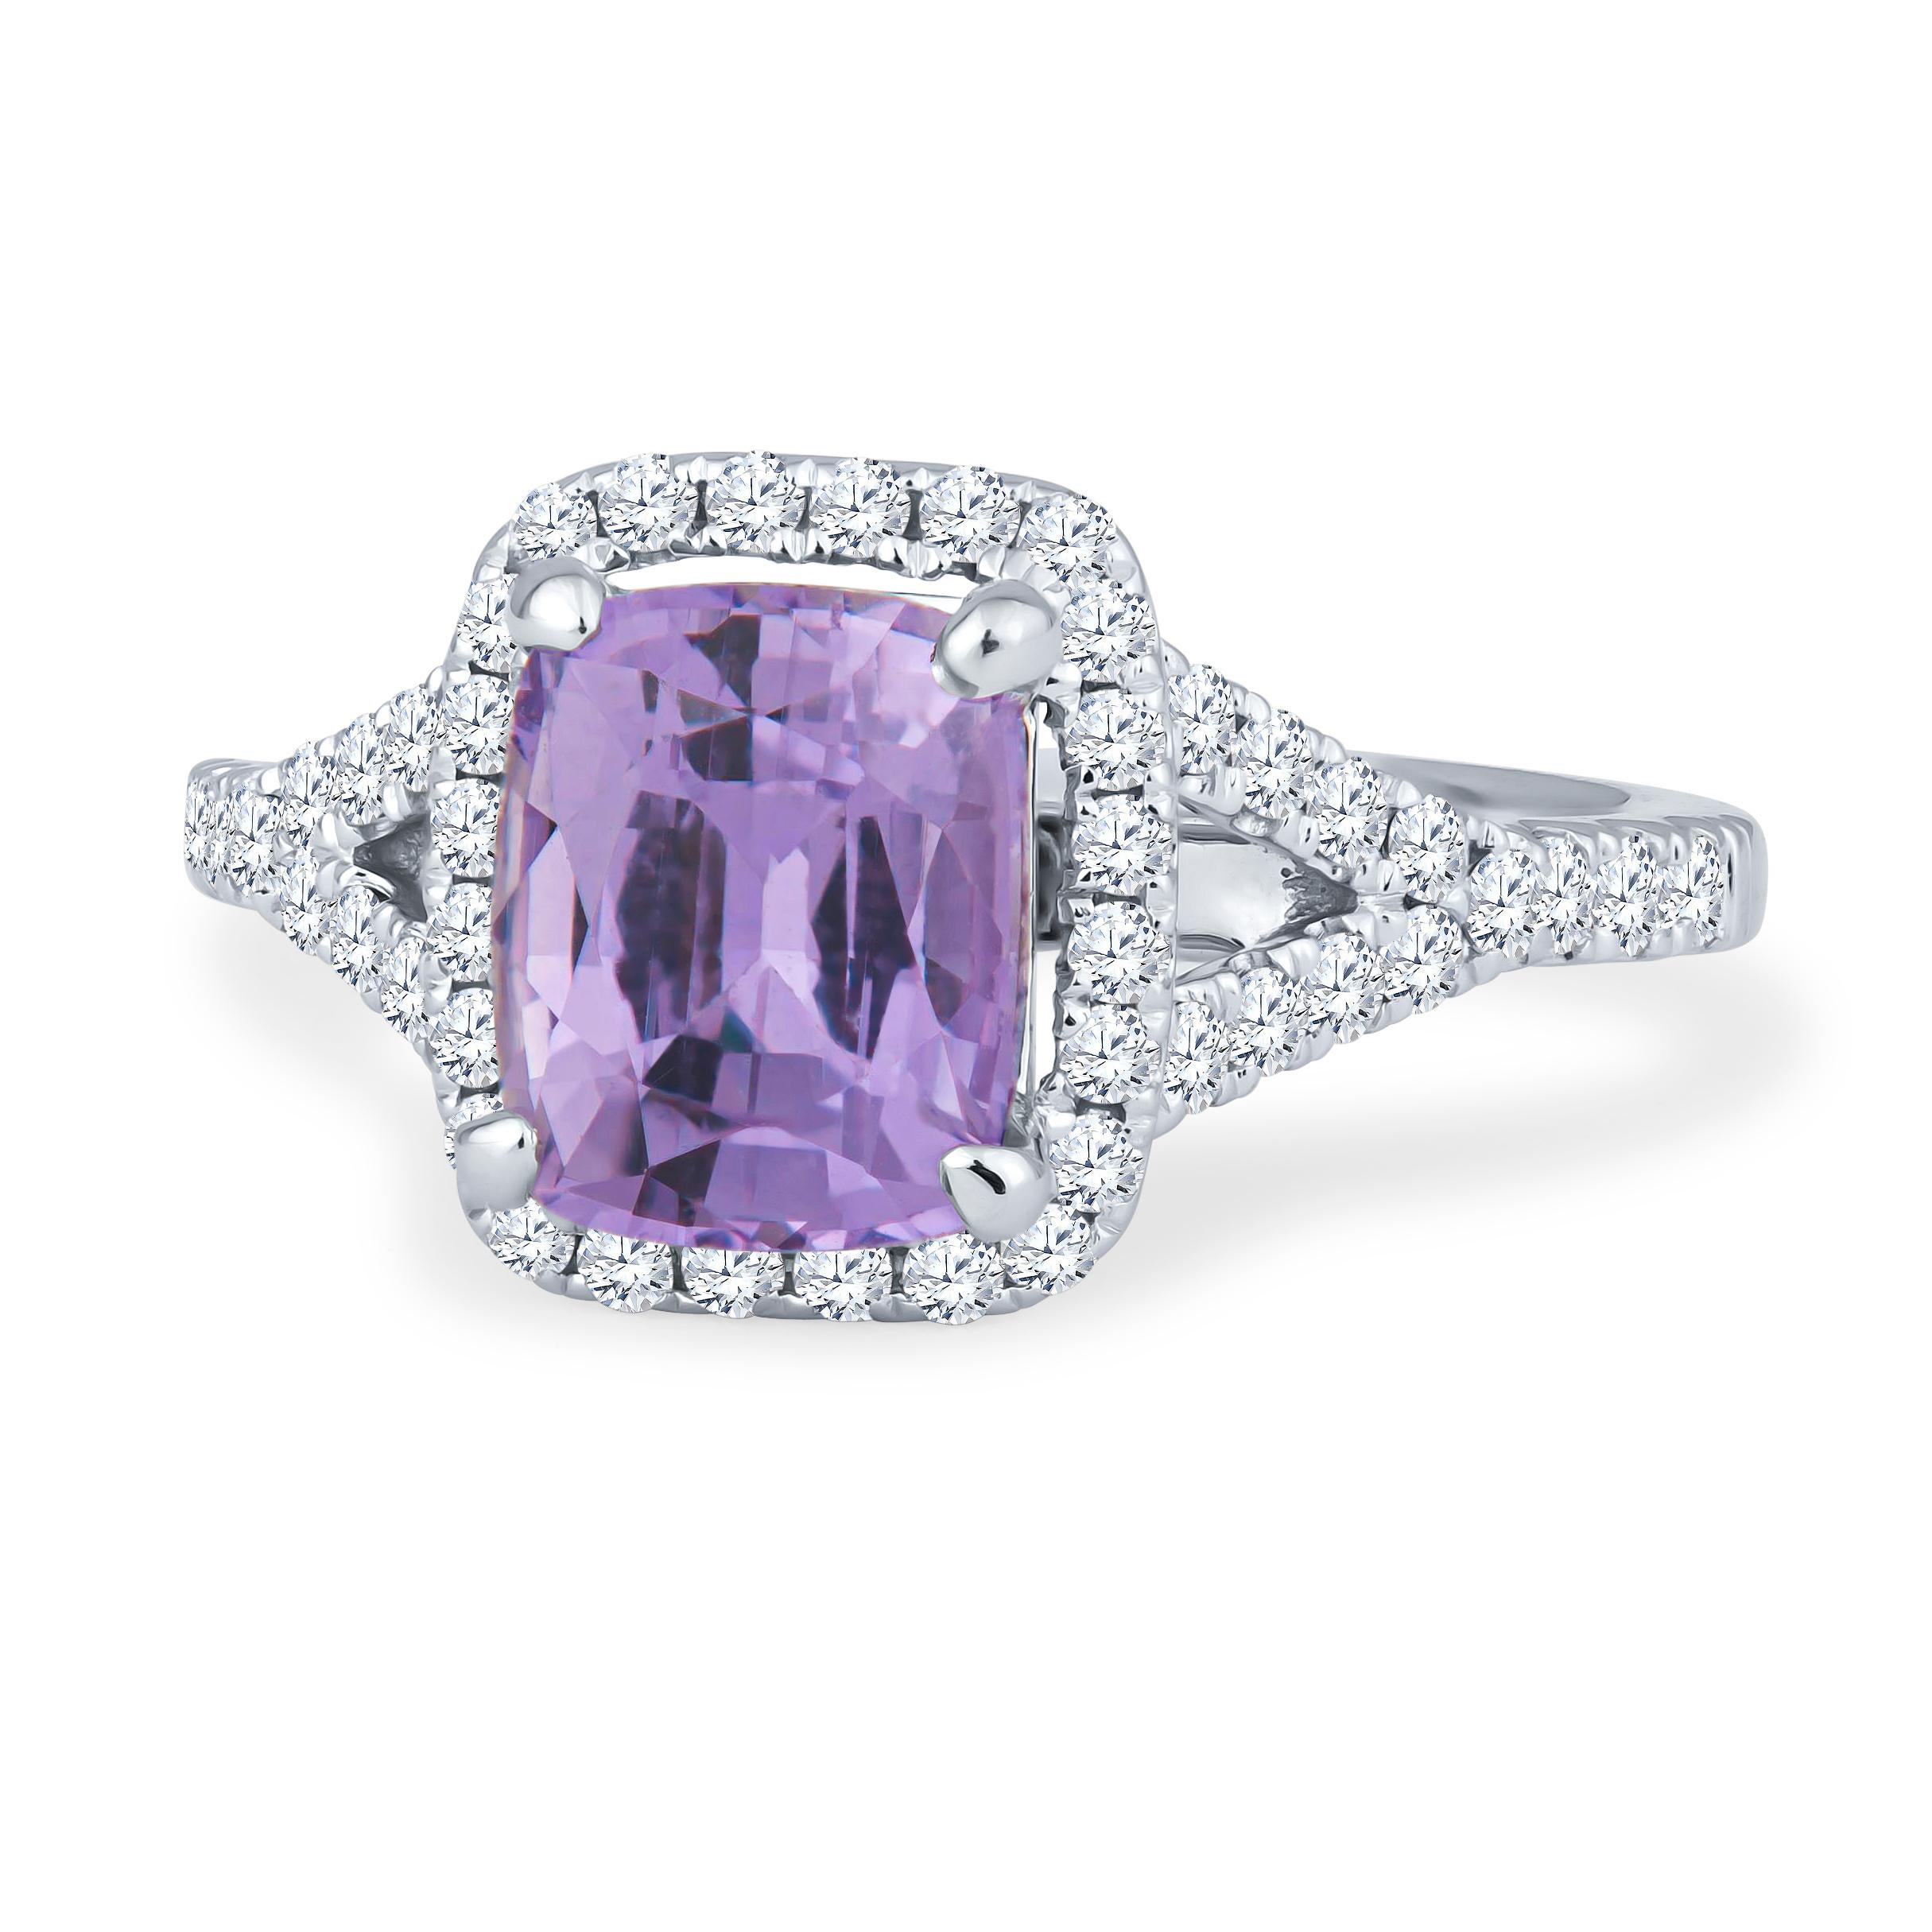 This insanely beautiful 1.74ct cushion cut natural sapphire is a purple hue that has not been heat treated and is noticeable from a mile away. This vibrant stone is set in an 18kt white gold cushion halo split shank ring and is surrounded by 0.45ct